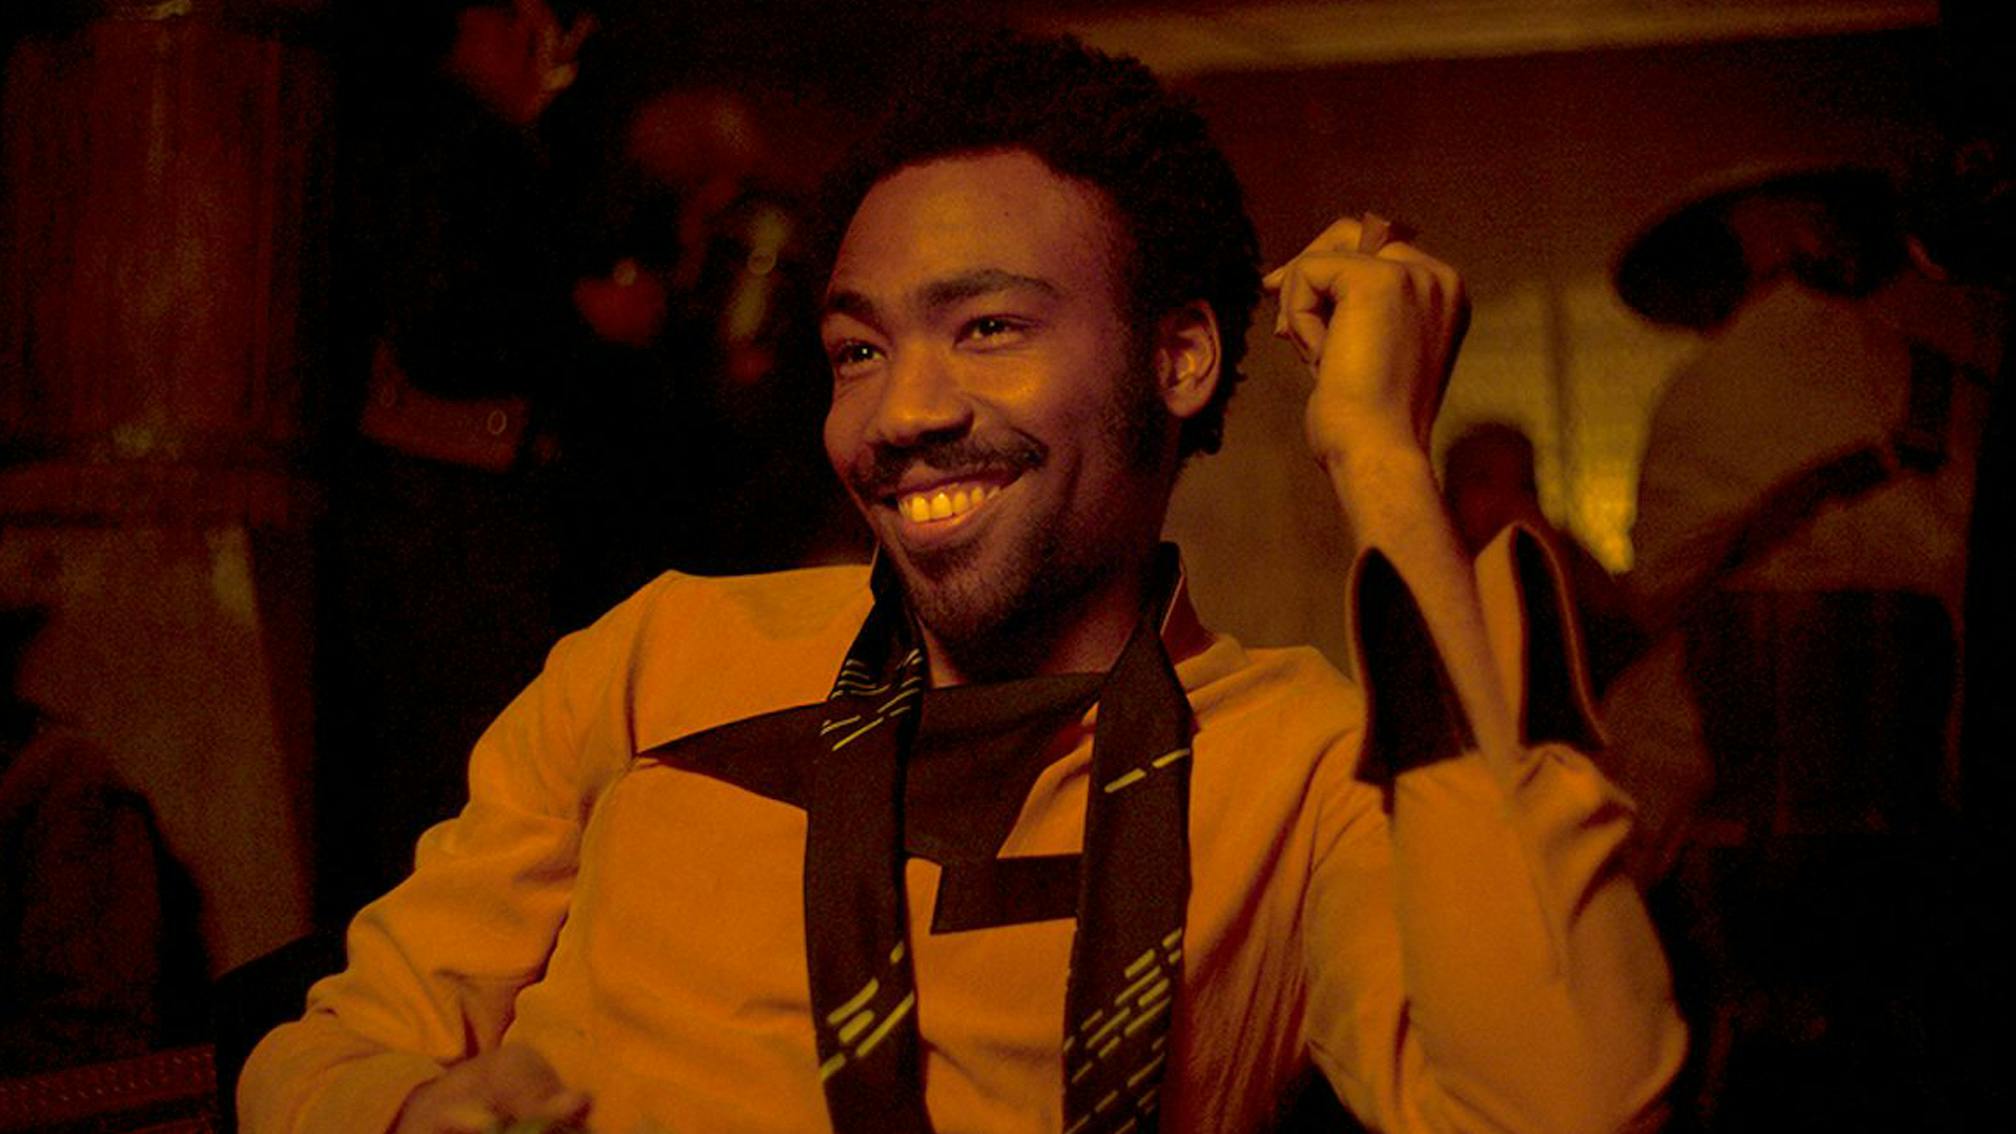 Is There A Lando Calrissian Series On Disney+ In The Works?